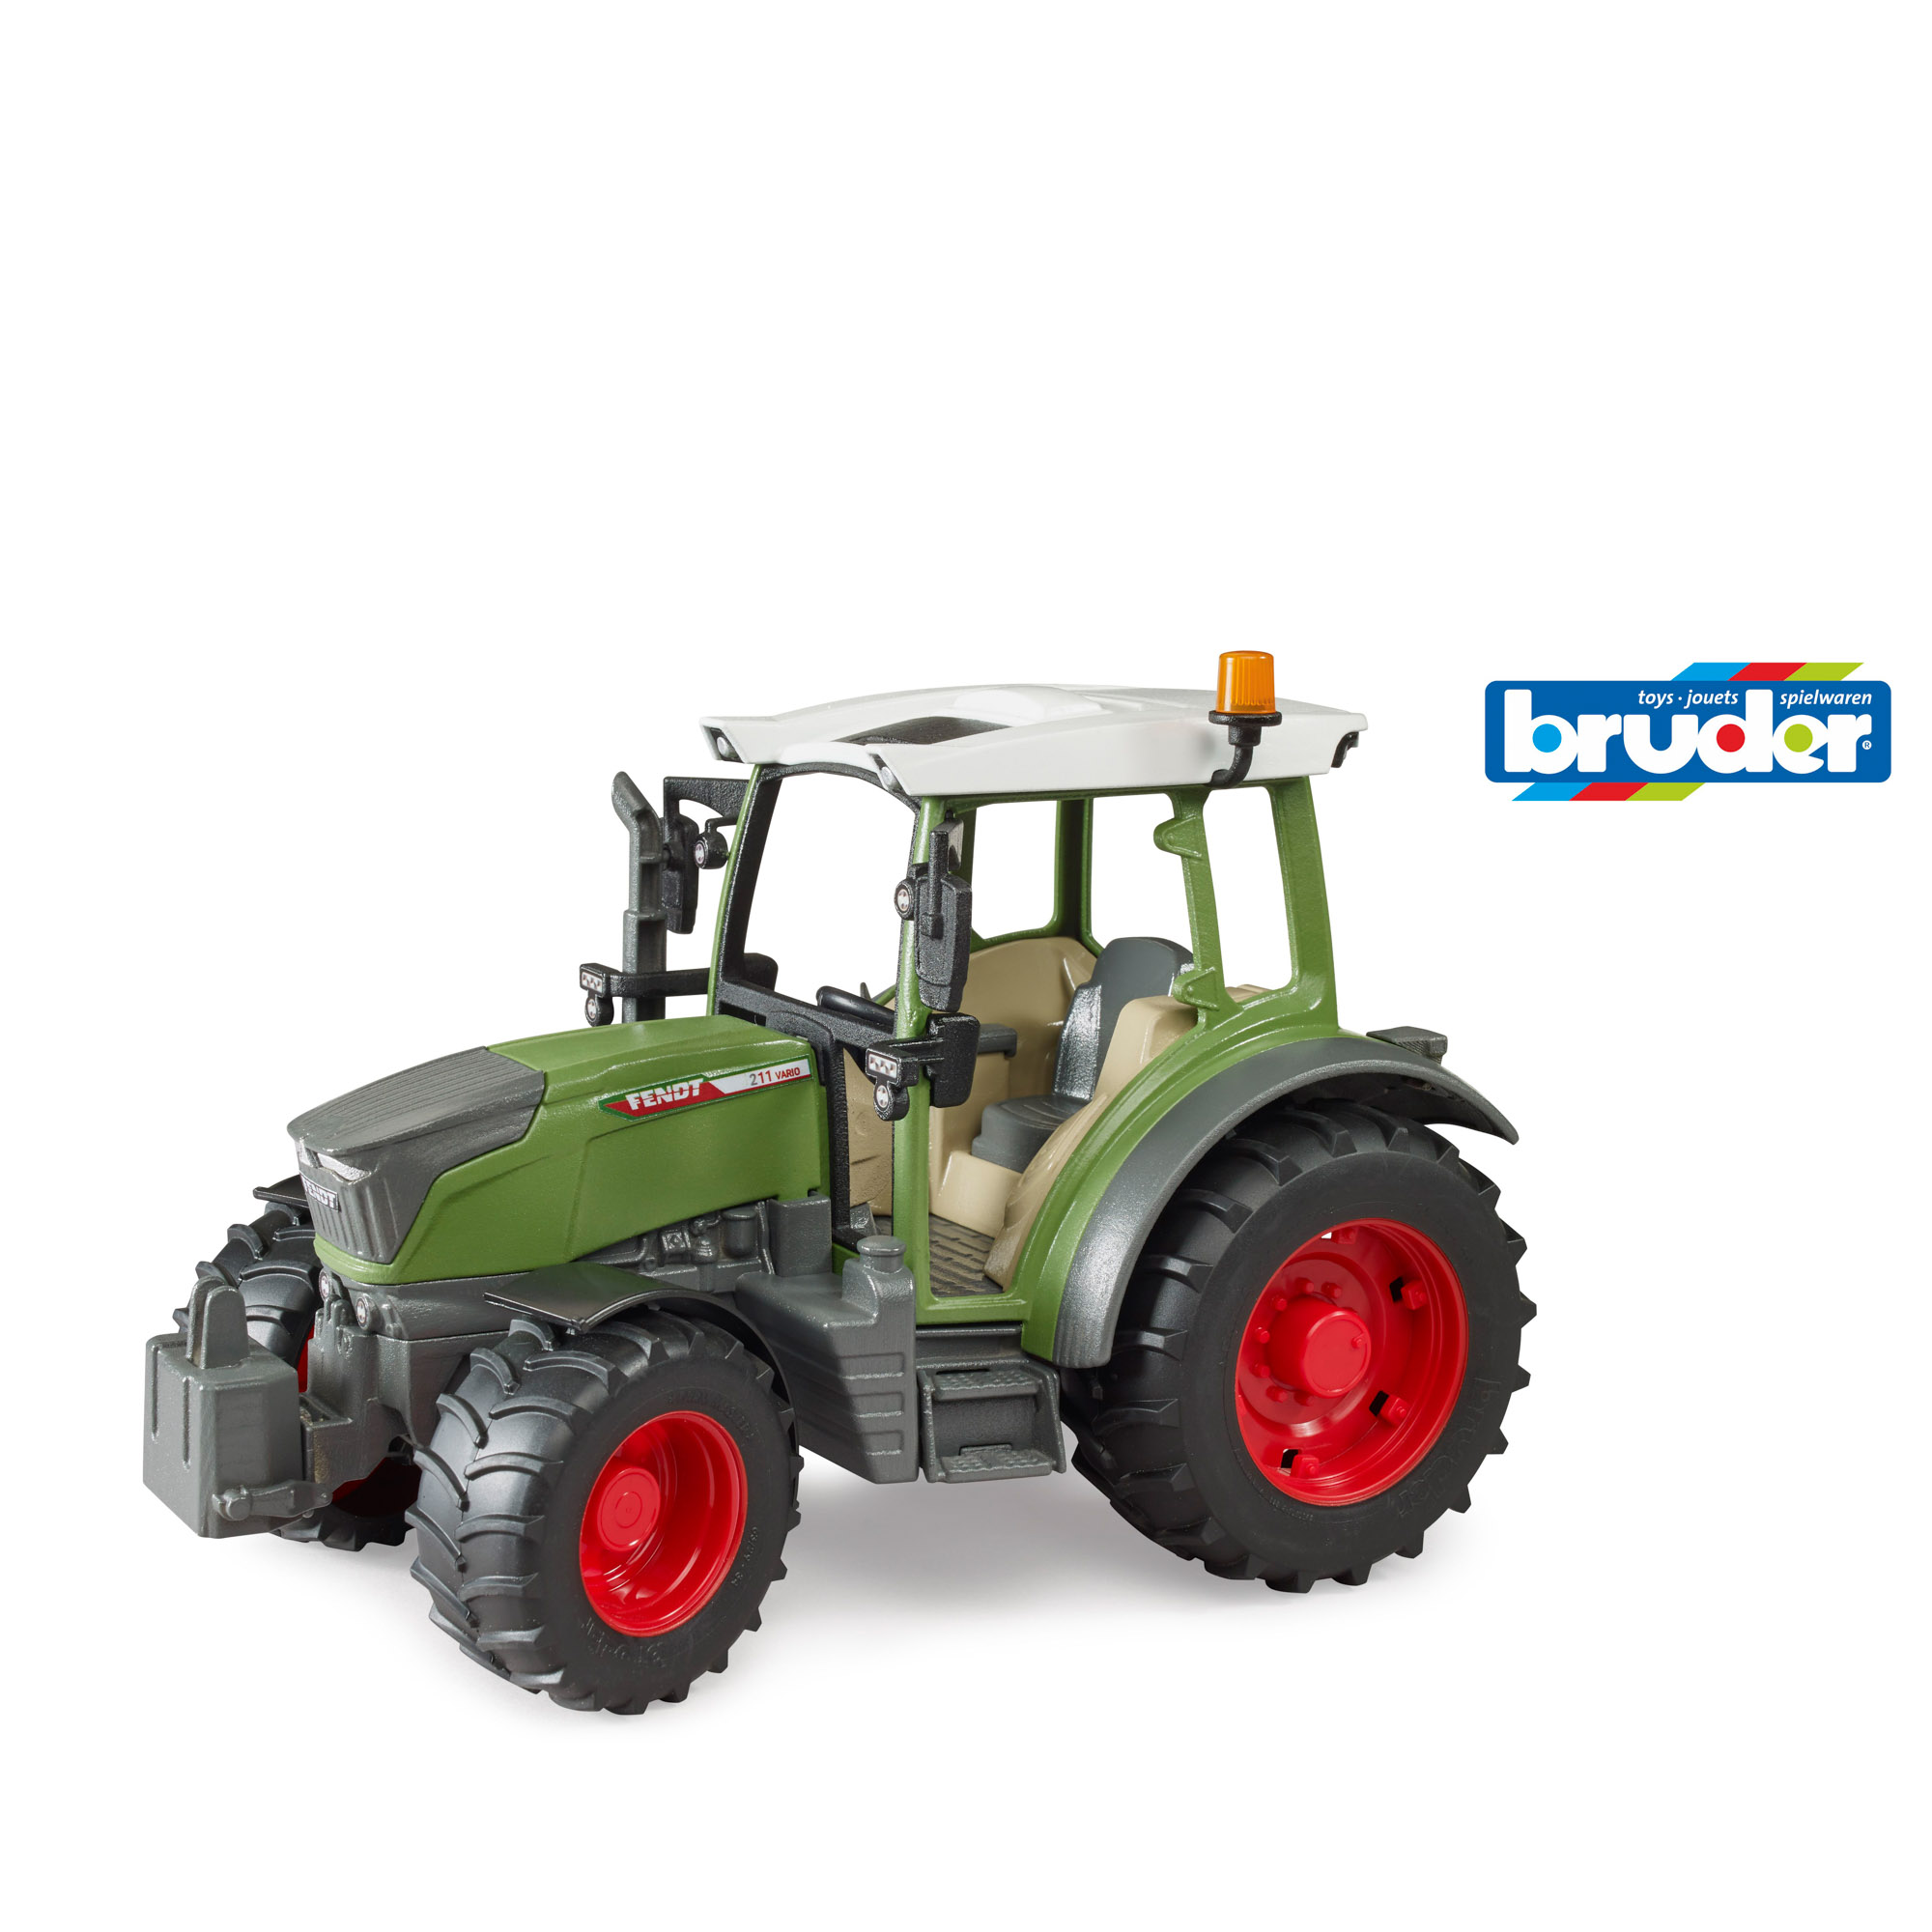 Toys by Fliegl Agro-Center GmbH